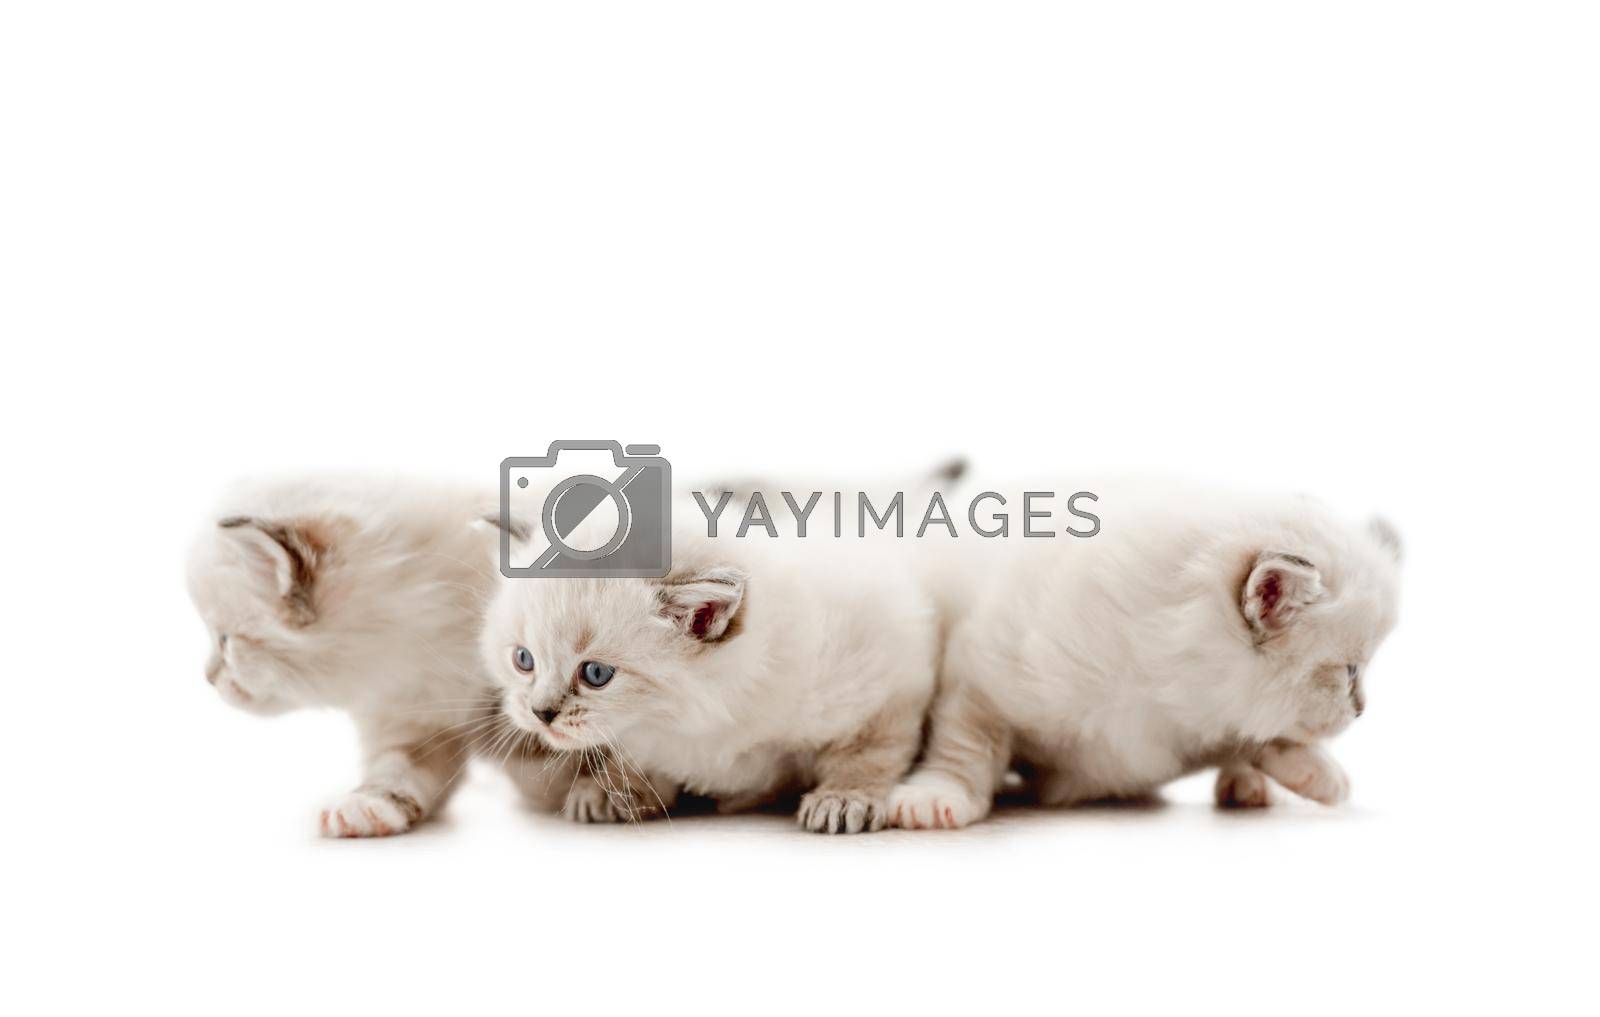 Three adorable fluffy ragdoll kittens with blue eyes looking at different sides isolated on white background. Cute purebred fluffy kitty cats together. Lovely little feline pets